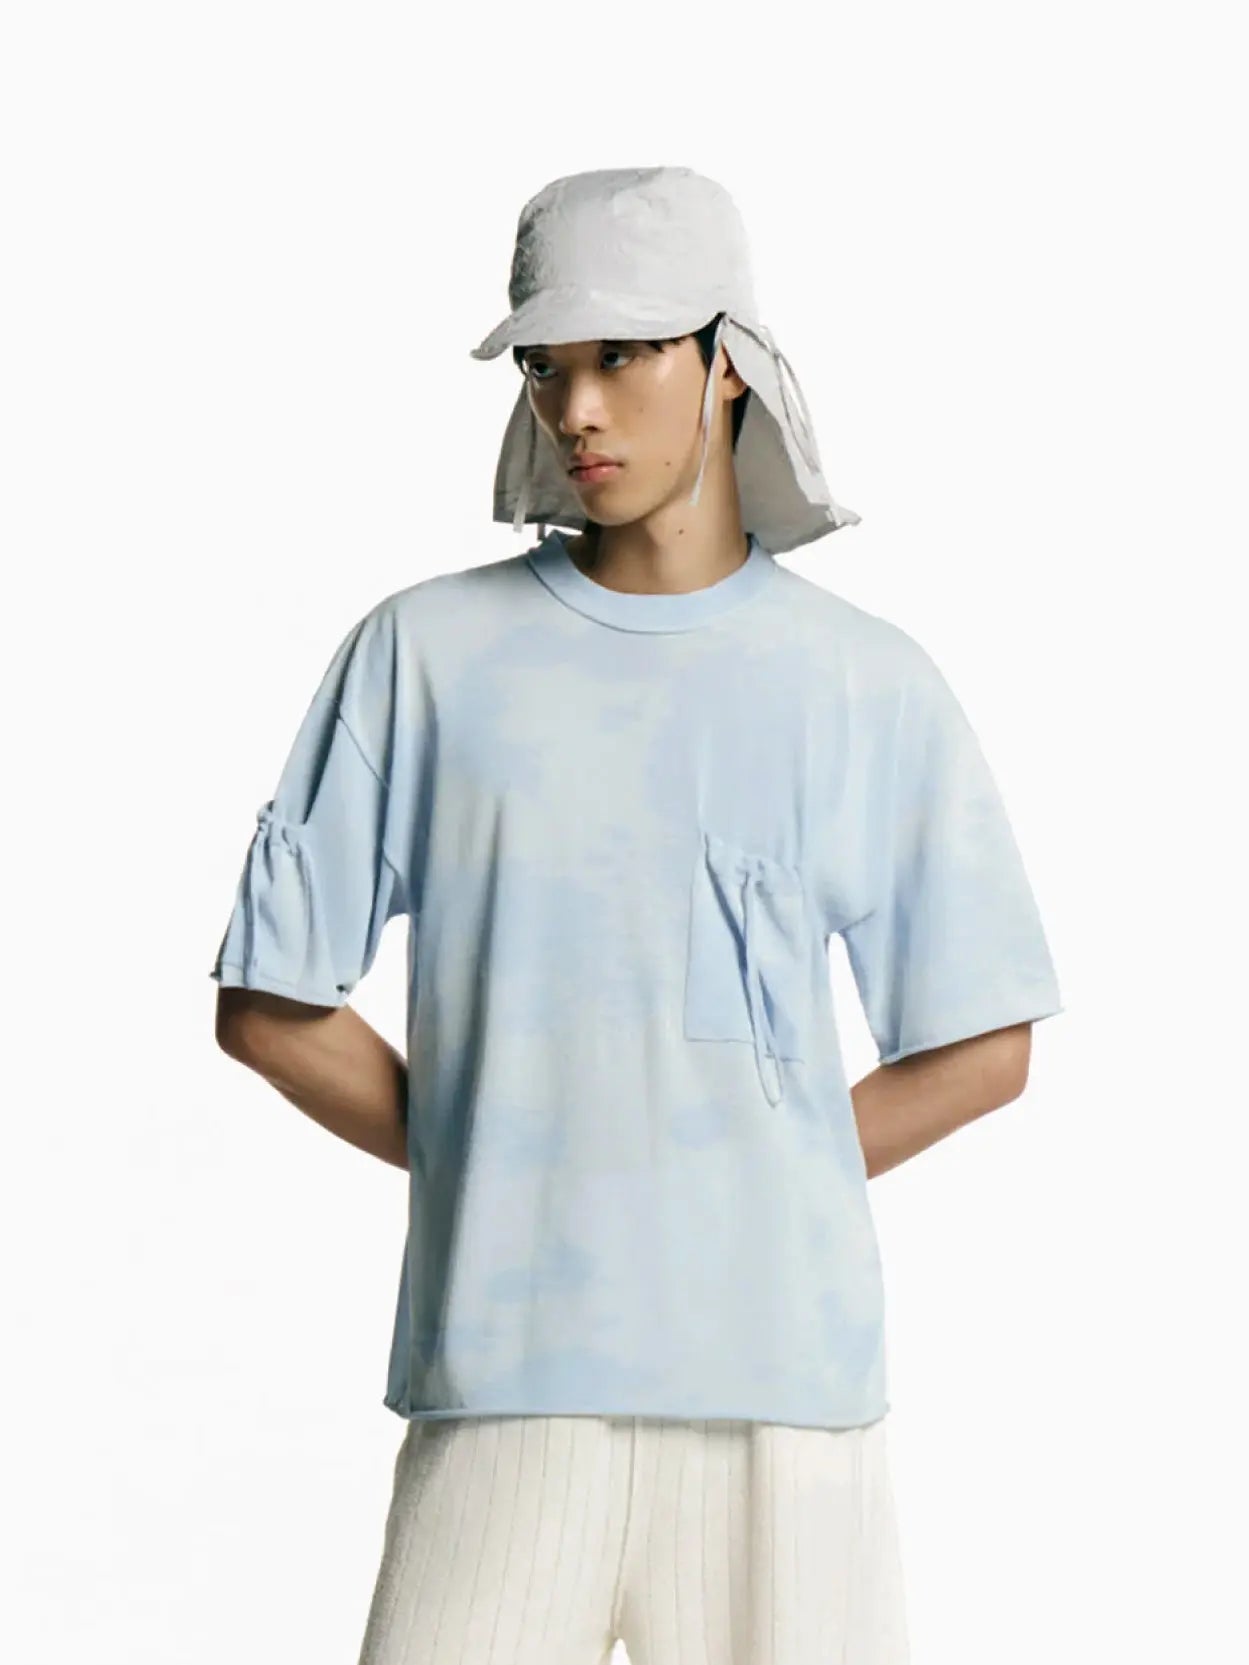 Person with short black hair wearing a Tako Cap Ice Grey by Rus, with long side flaps and a dark-colored collared shirt. This stylish look could easily be found at a trendy store in Barcelona. The background is plain white.